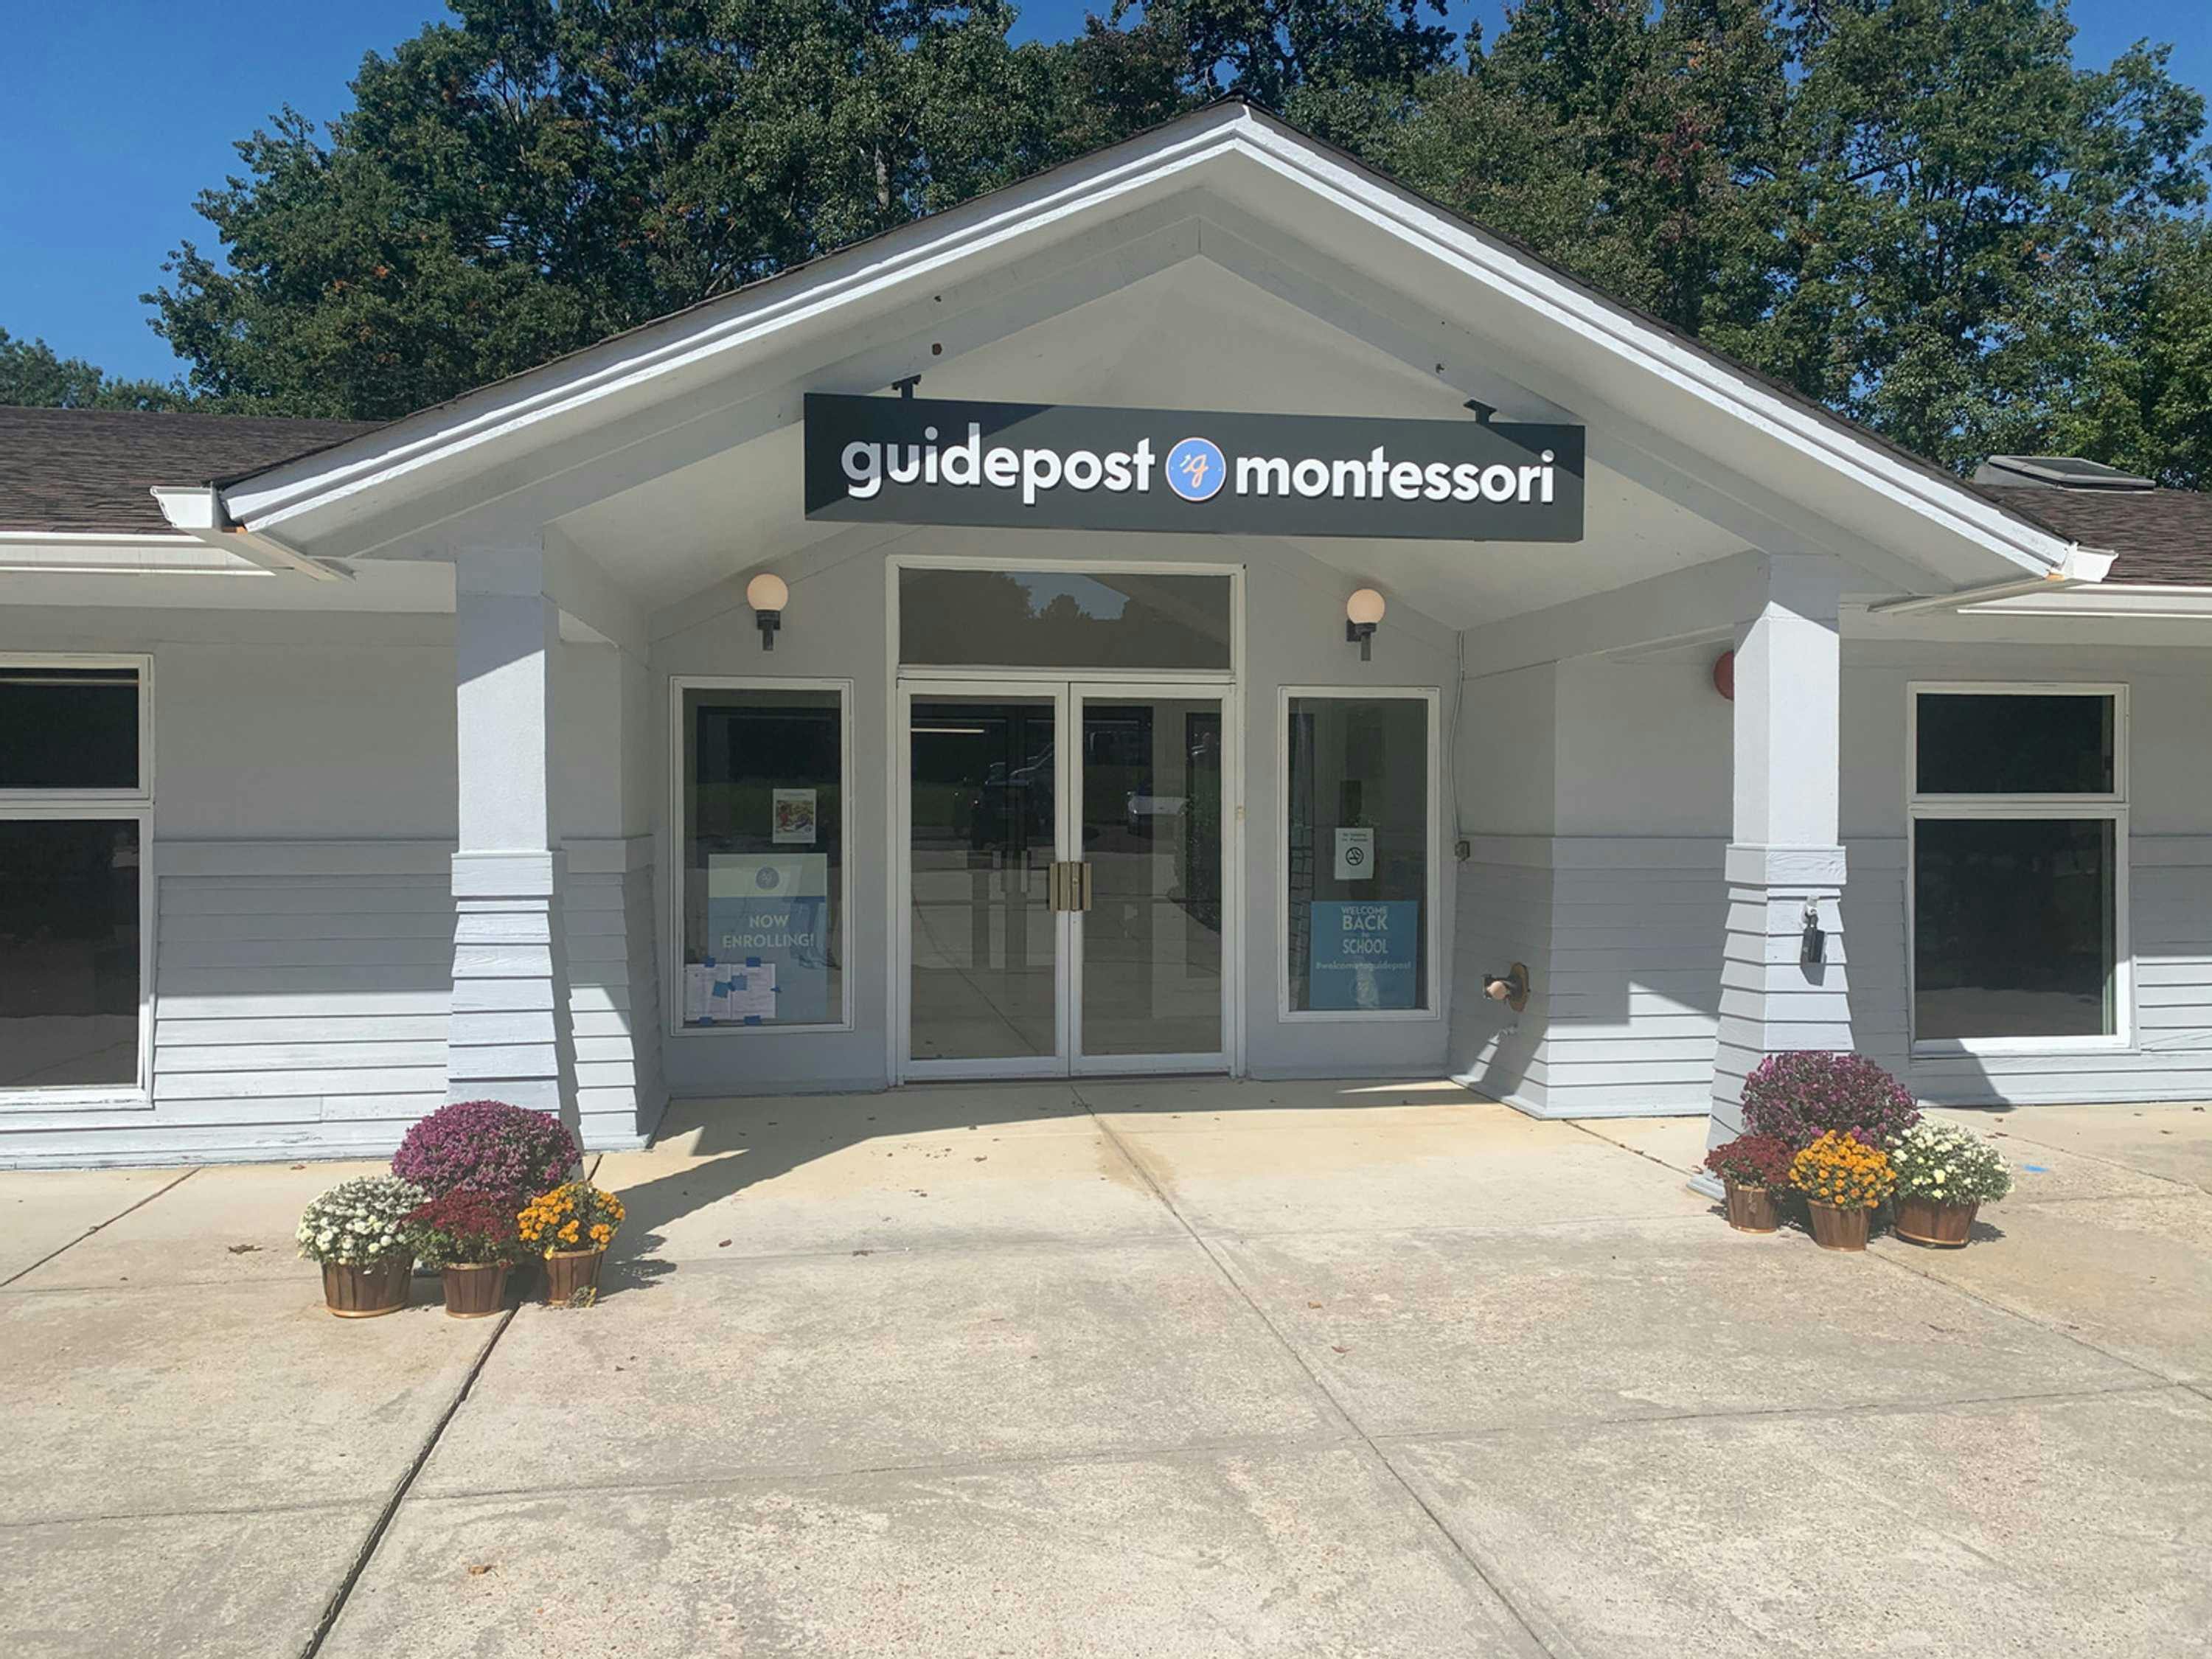 View of the entrance to Guidepost Montessori at Hampshire, showing the white exterior and front porch overhang with a branded Guidepost Montessori sign hanging from it. In front of both pillars to the overhang are flowers.